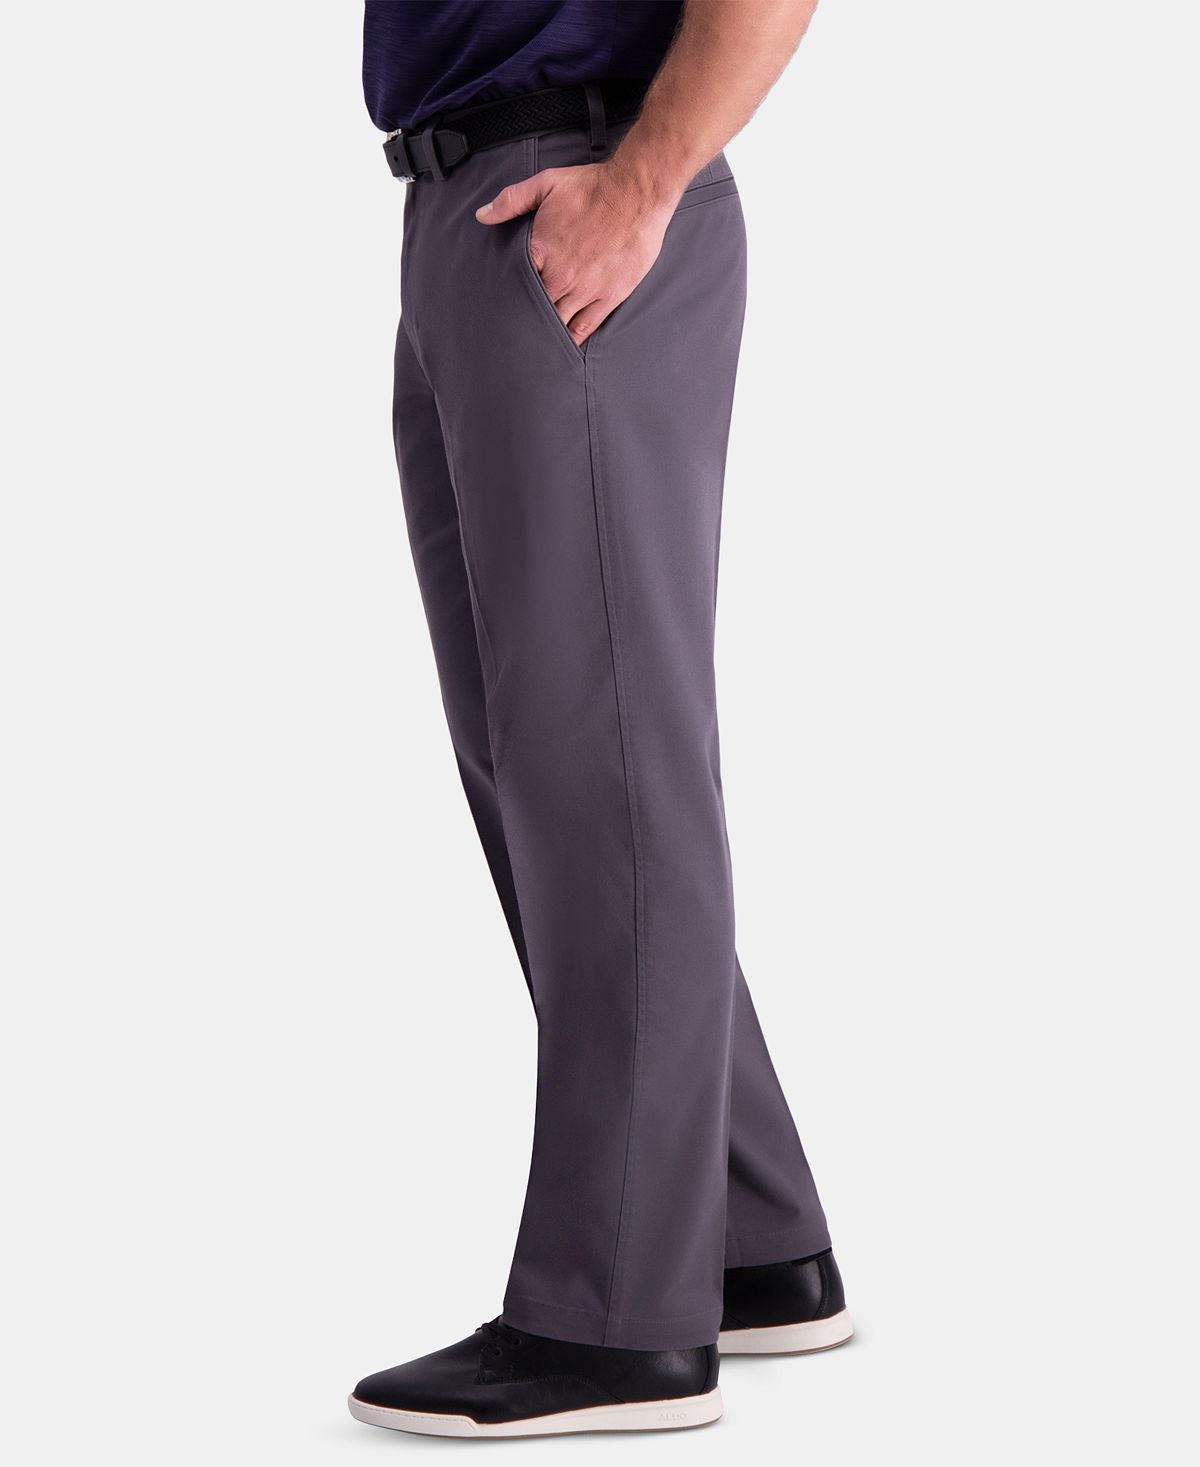 Haggar Premium Comfort Khaki Classic-fit 2-way Stretch Wrinkle Resistant Flat Front Stretch Casual Pants Charcoal